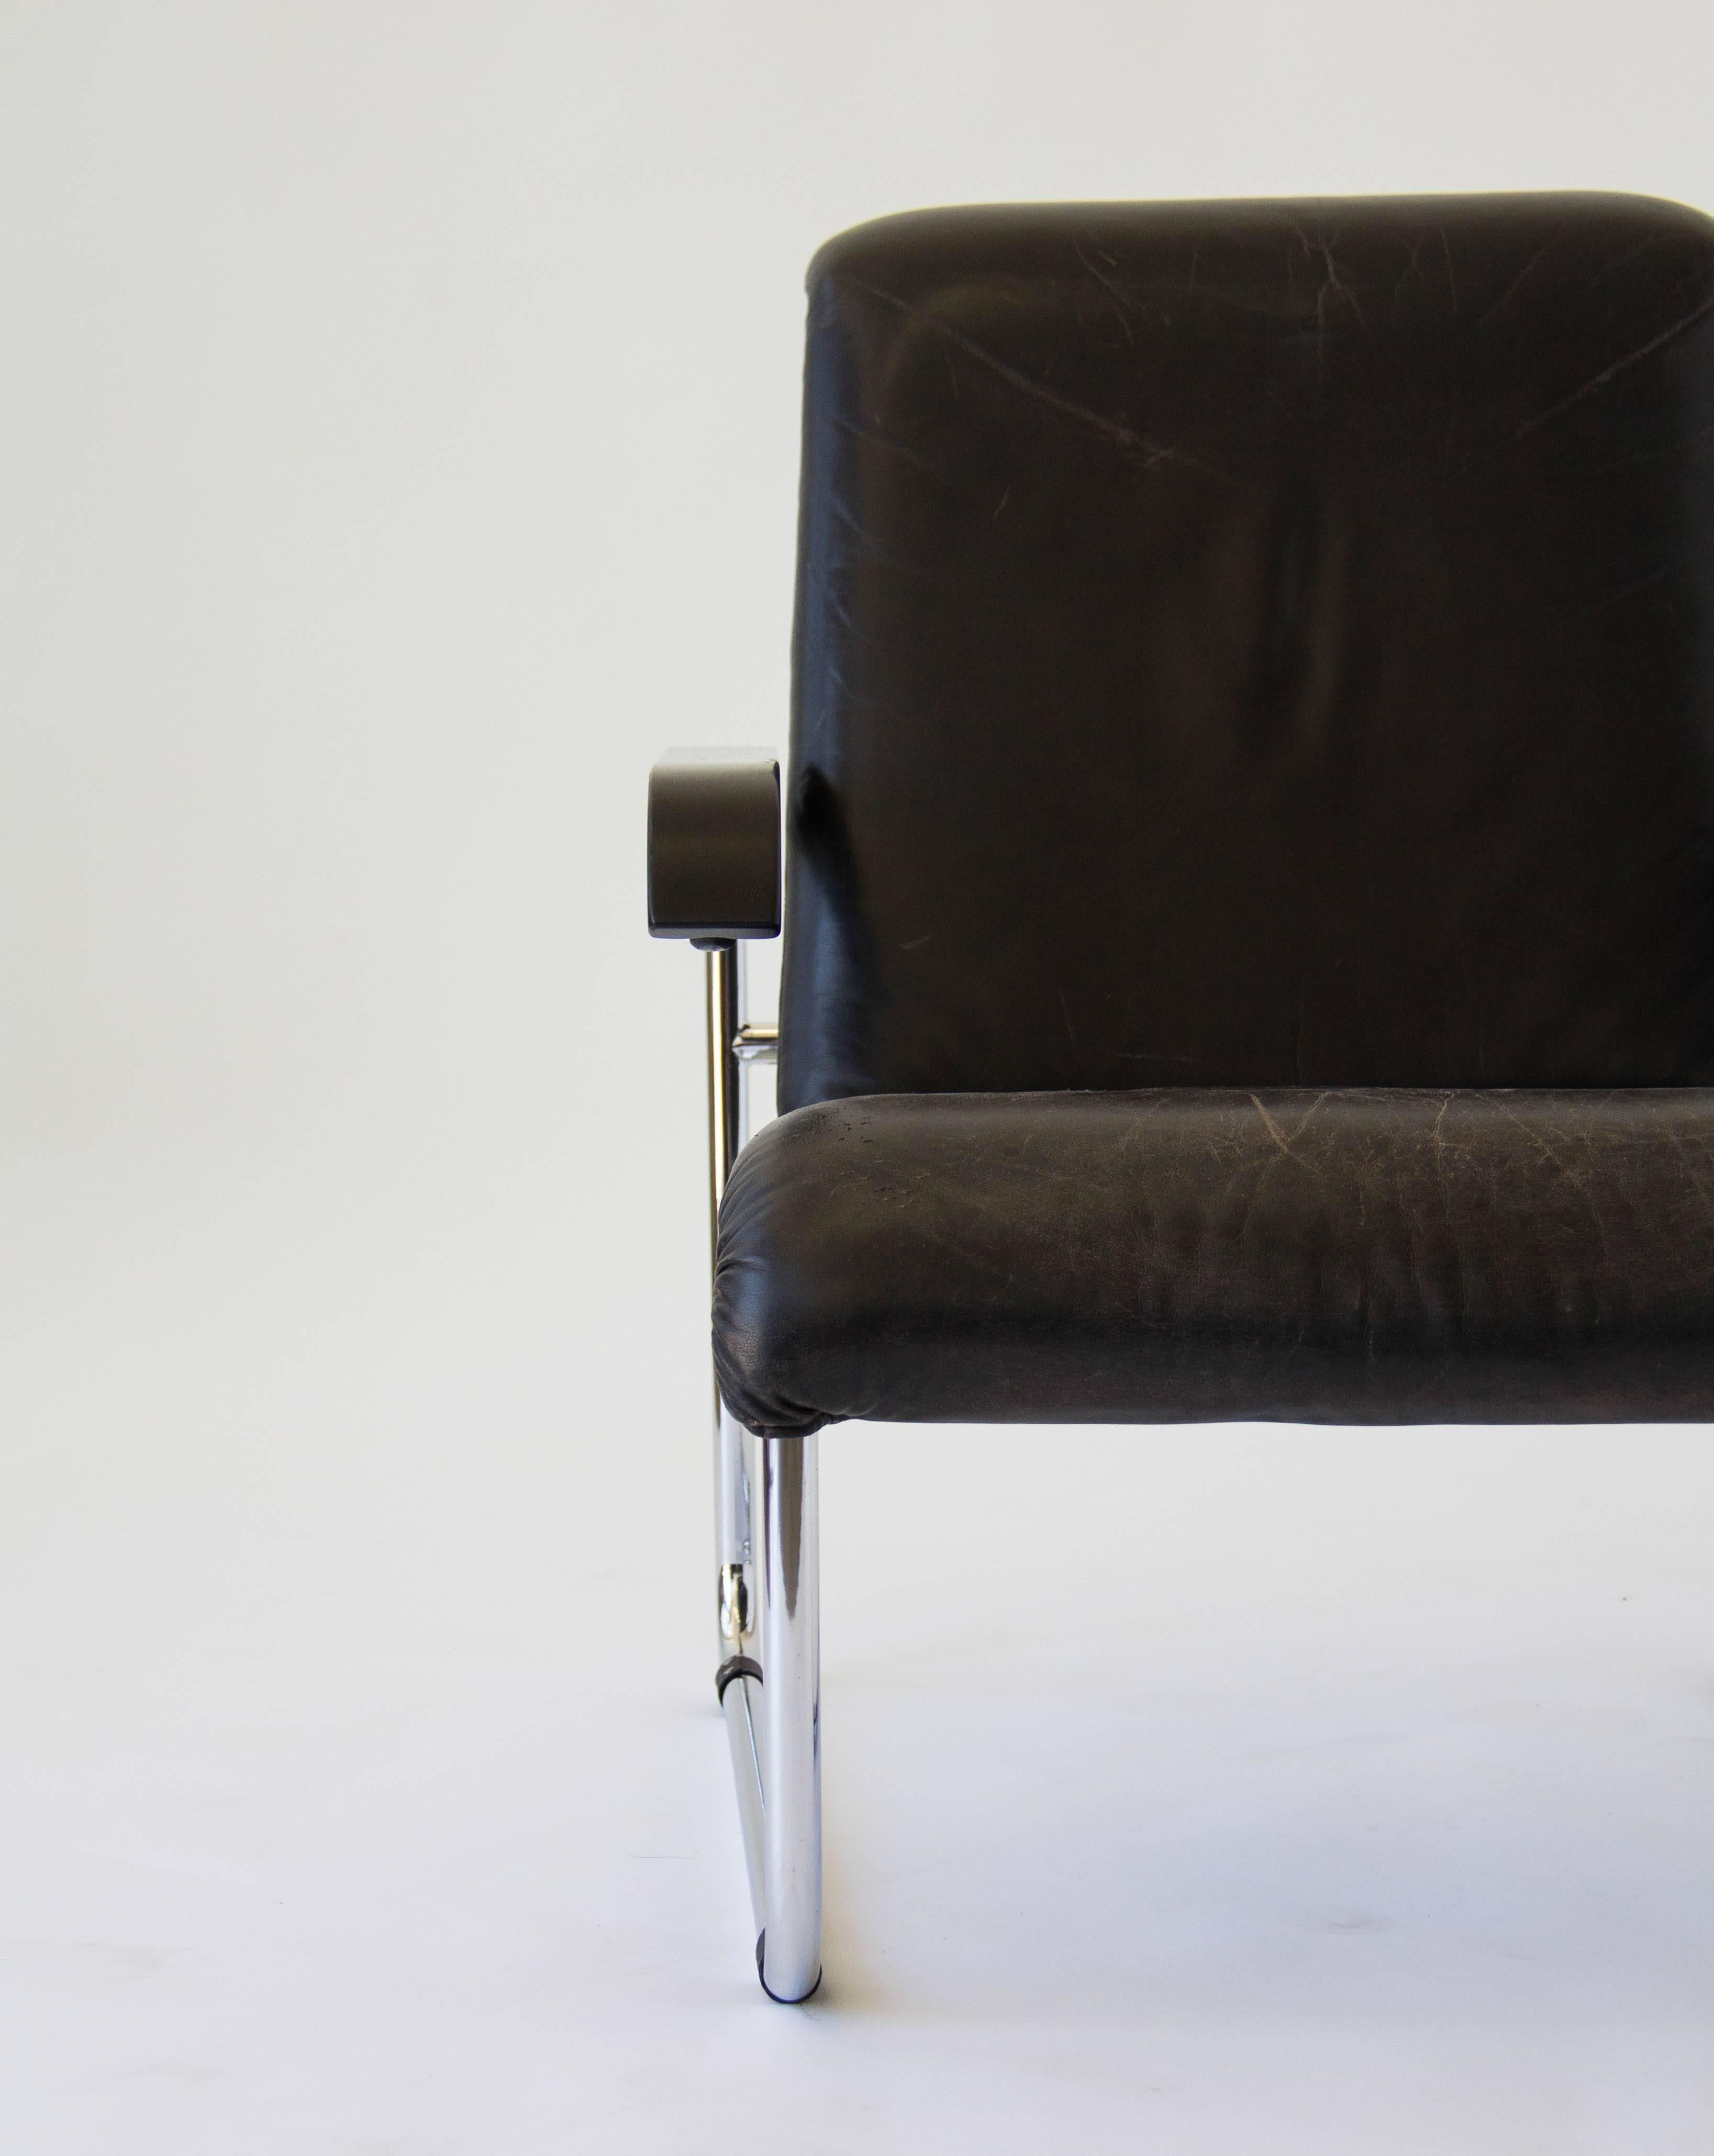 Chrome Marcel Breuer for Thonet B35 Leather Lounge Chair